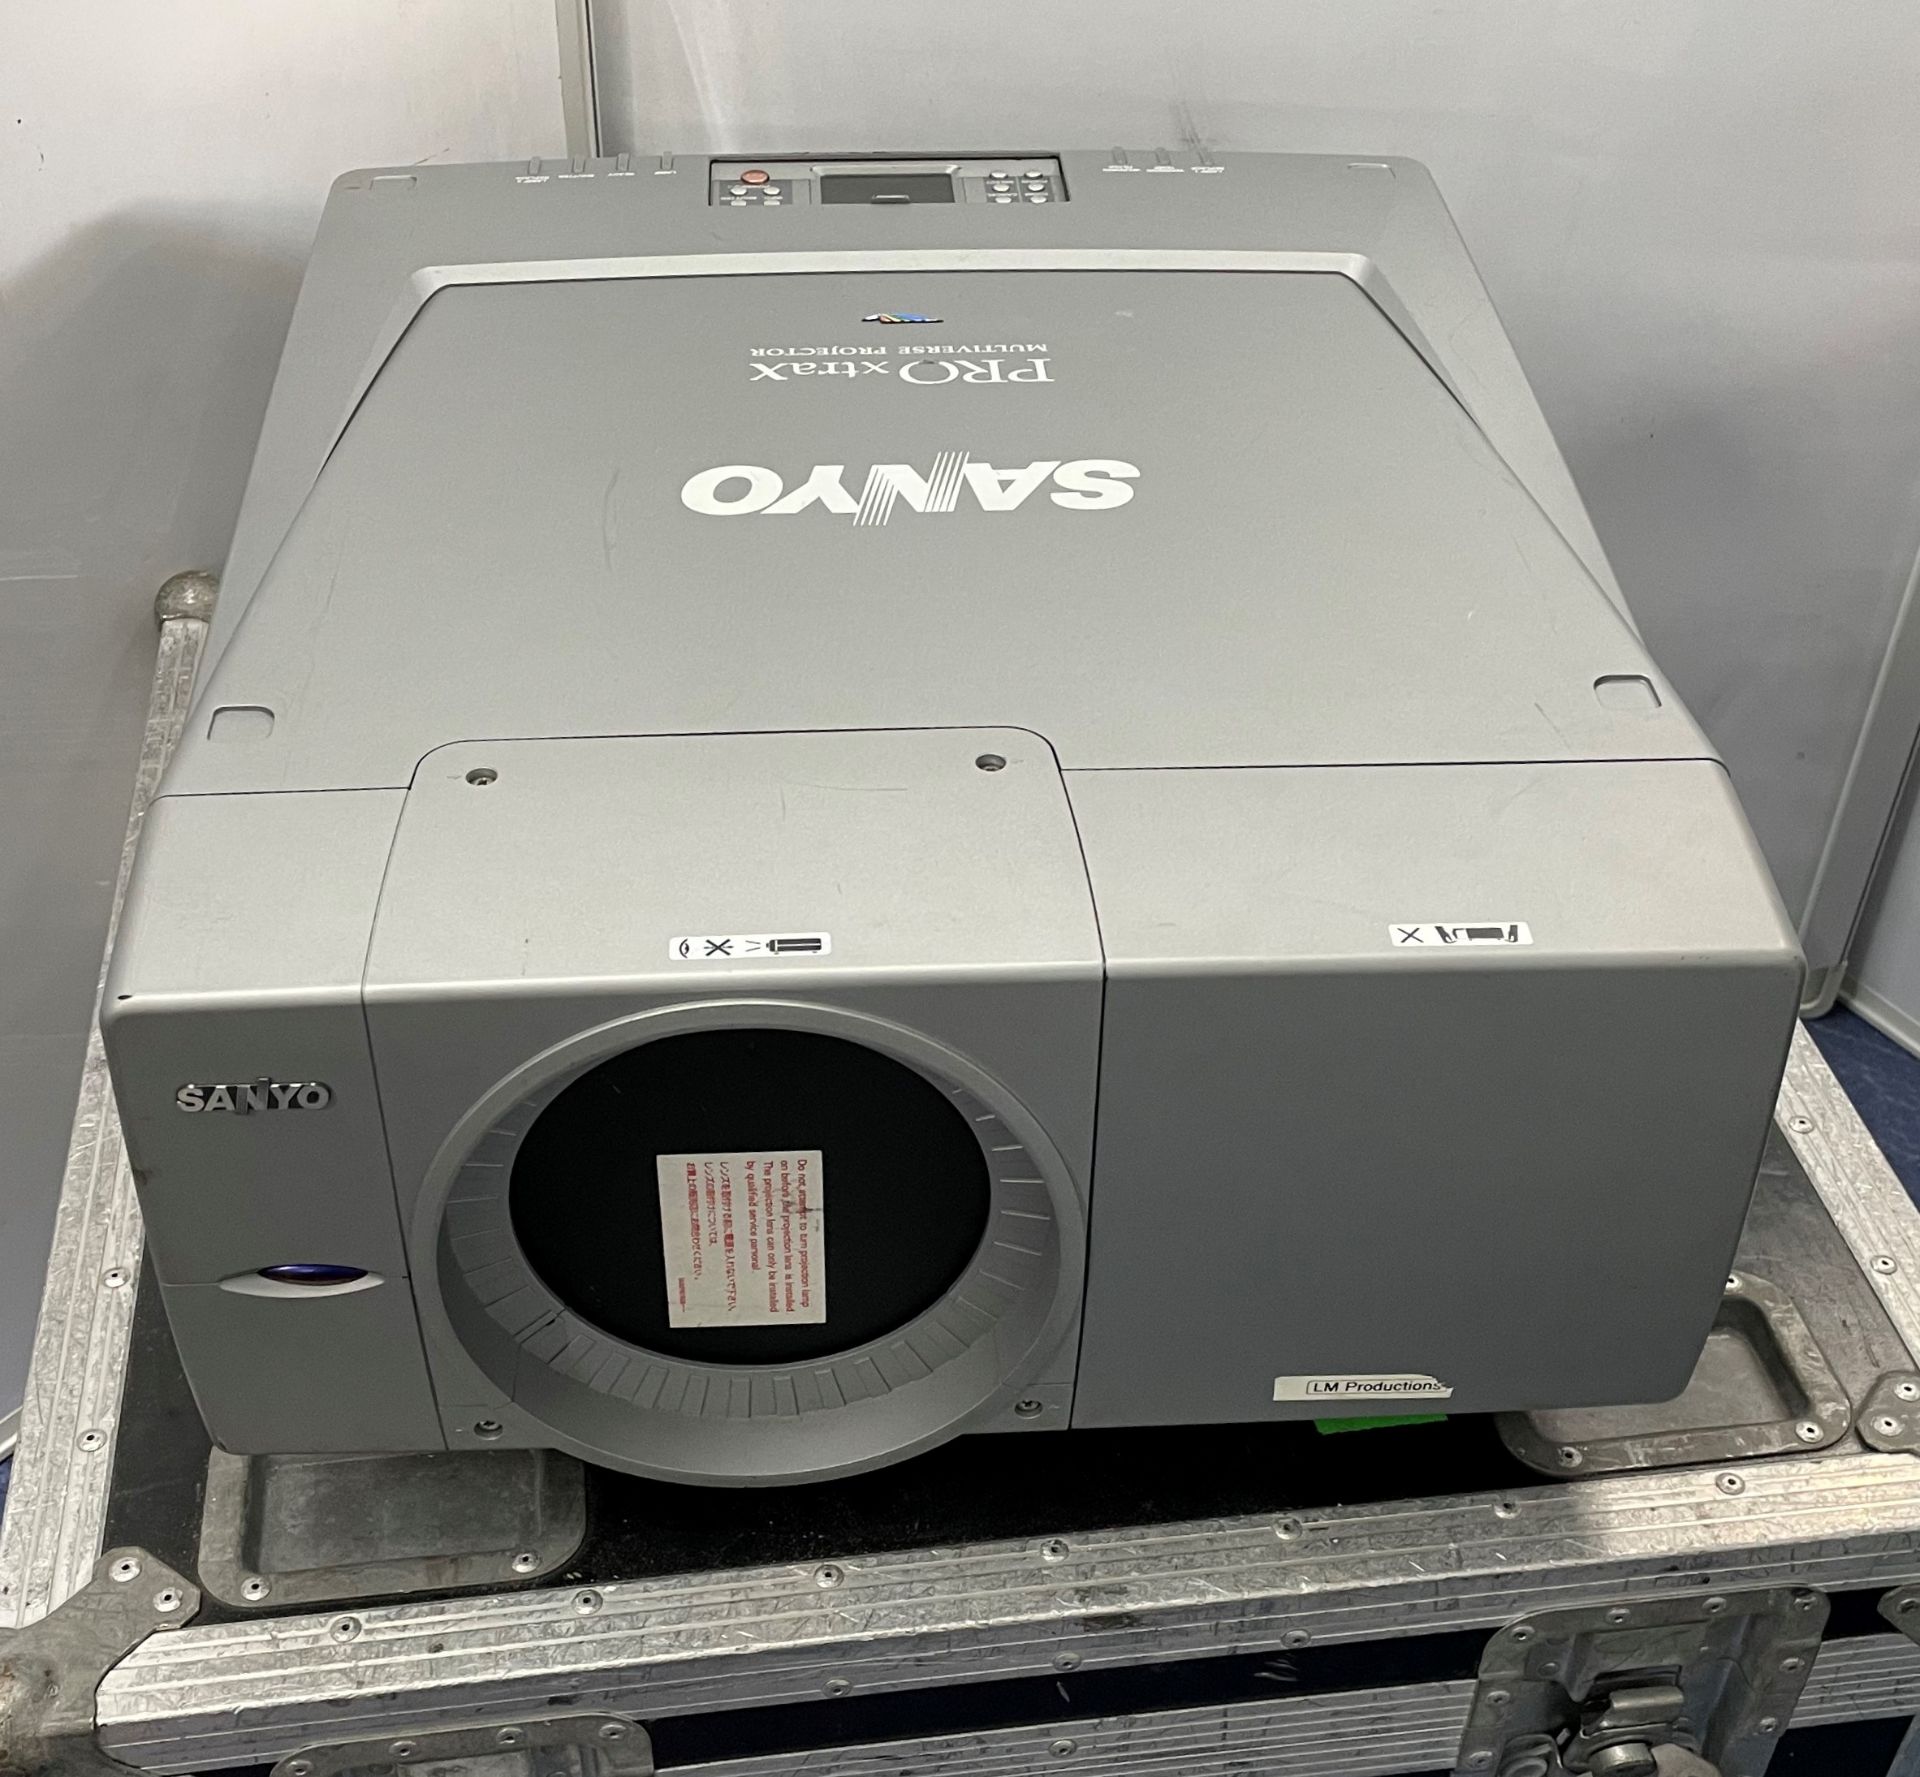 A Sanyo PROxtraX PLC XF-60 Multiverse Projector No.G4X01275 with 0.8:1 Lens, 1024 x 768, Lamp and - Image 6 of 6